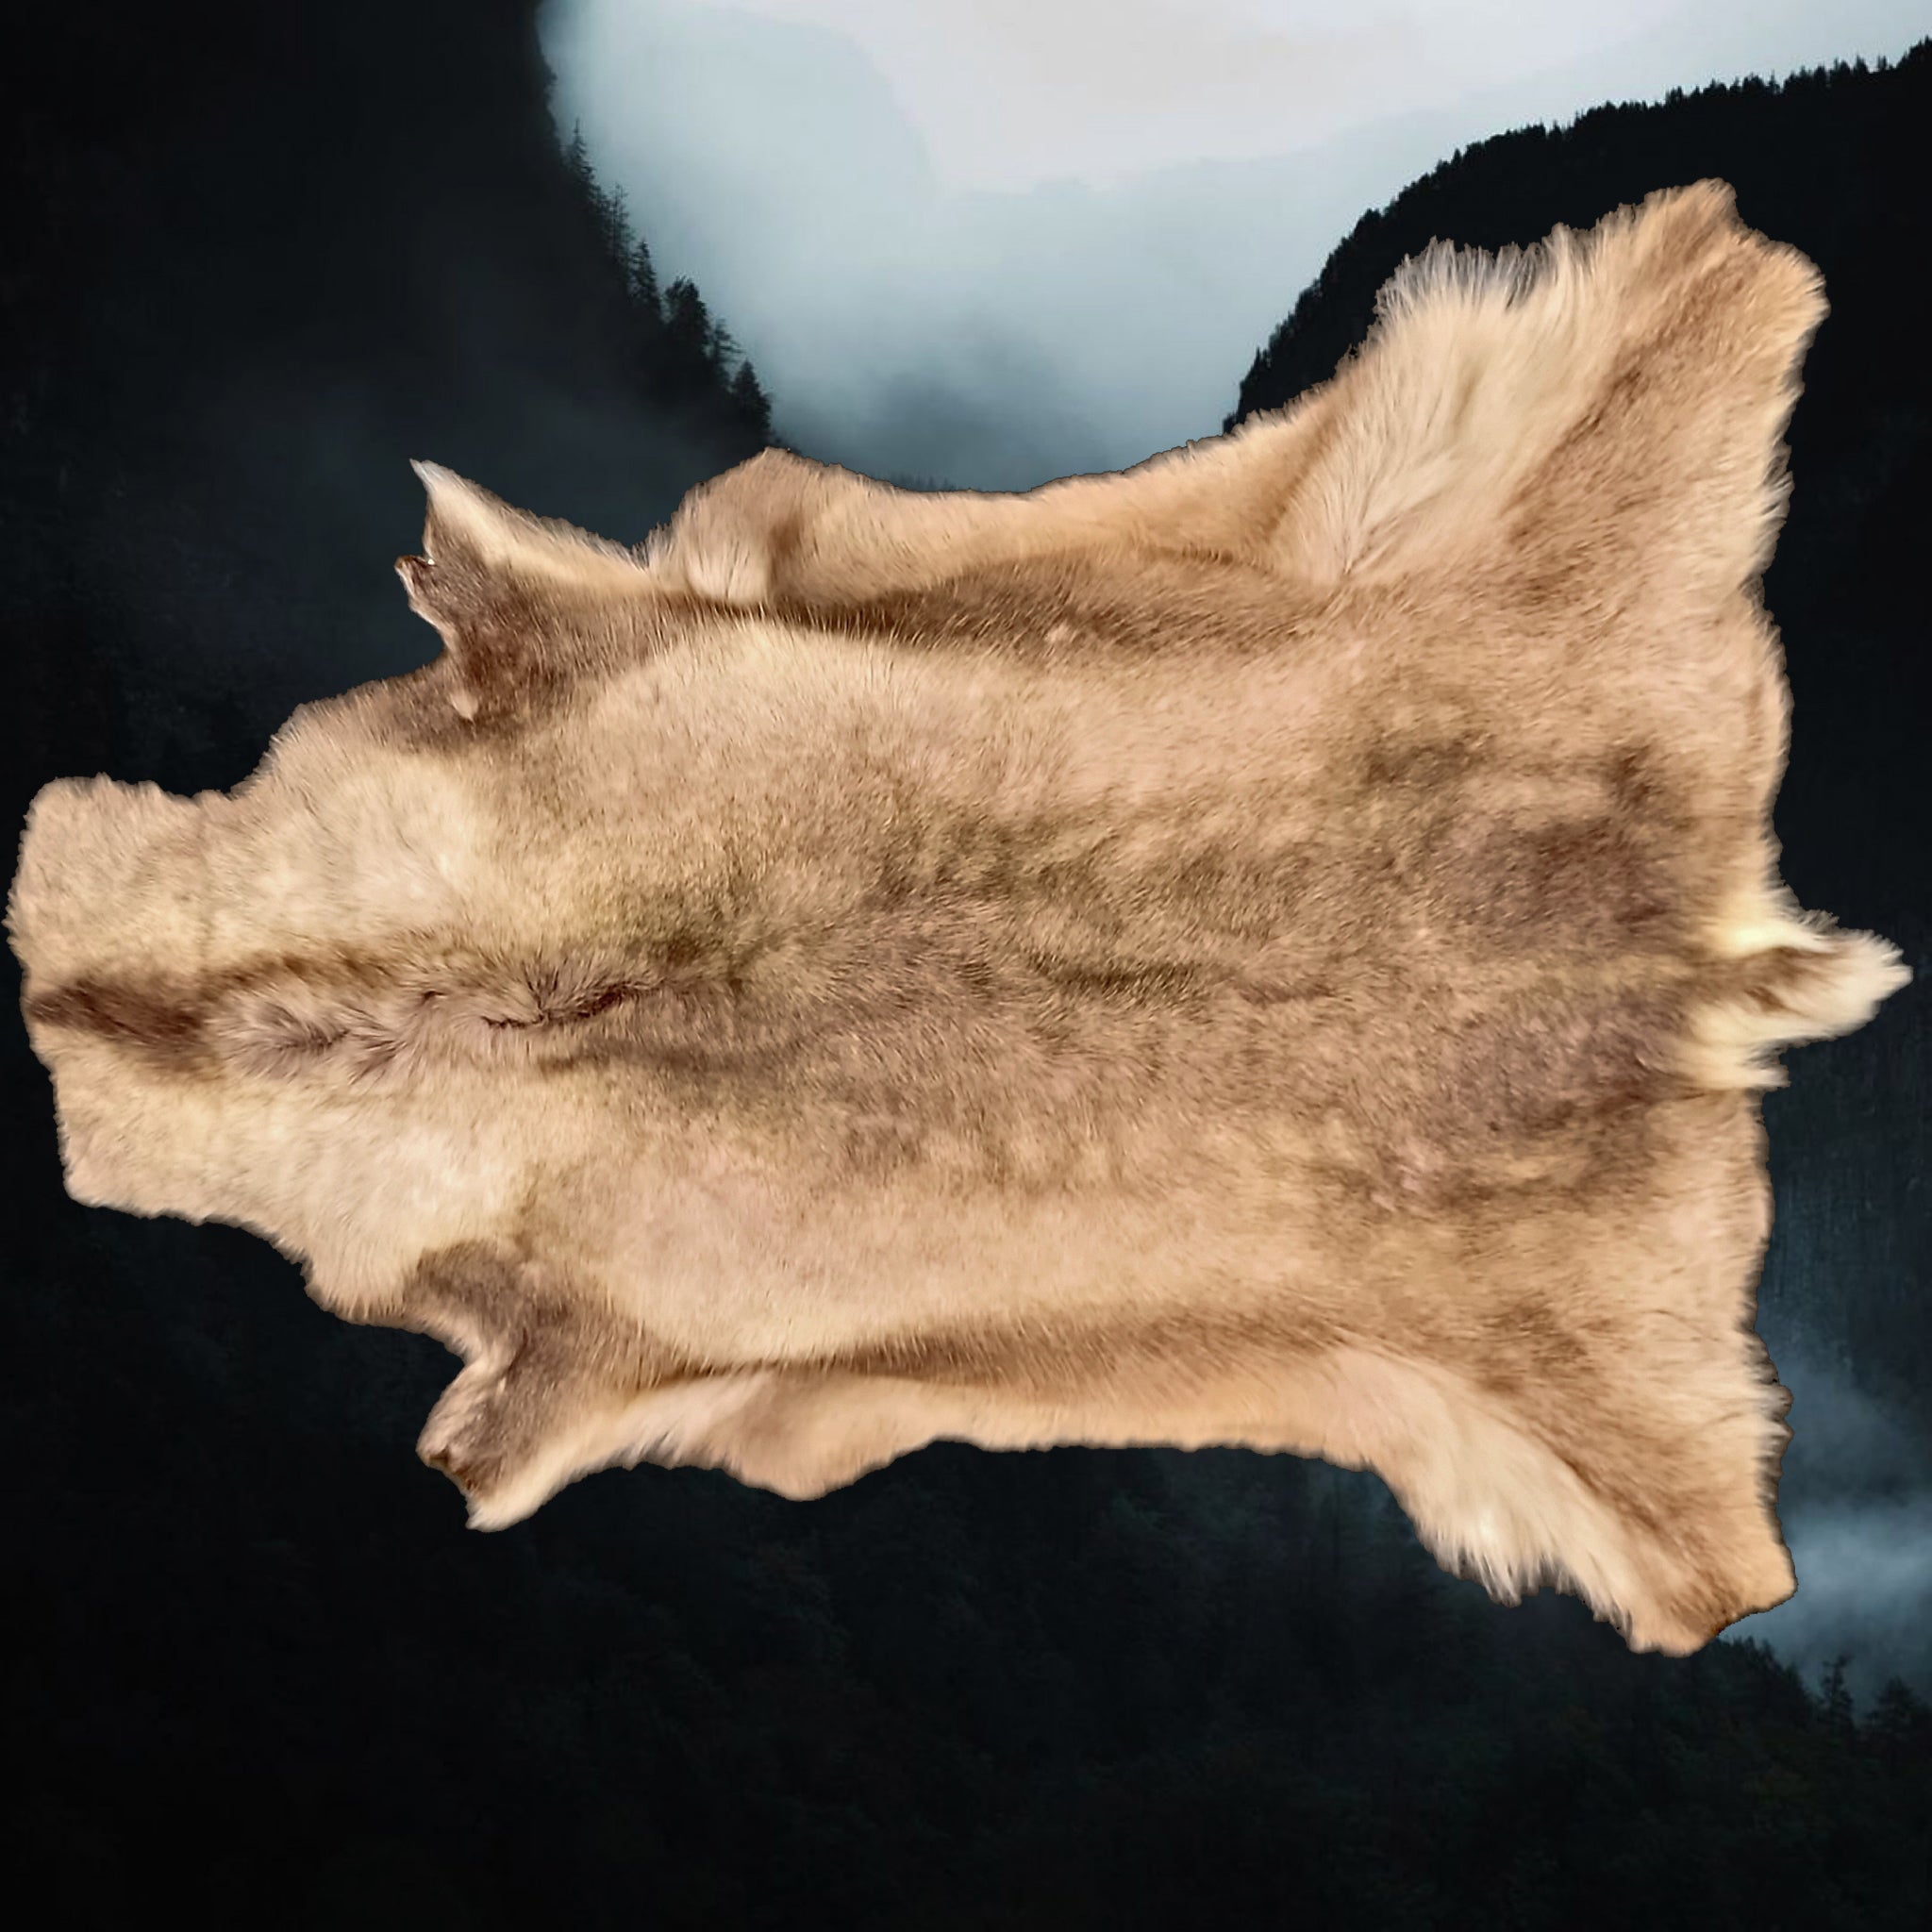 Full reindeer hide from Lappland - Animal Skins from The Viking Dragon